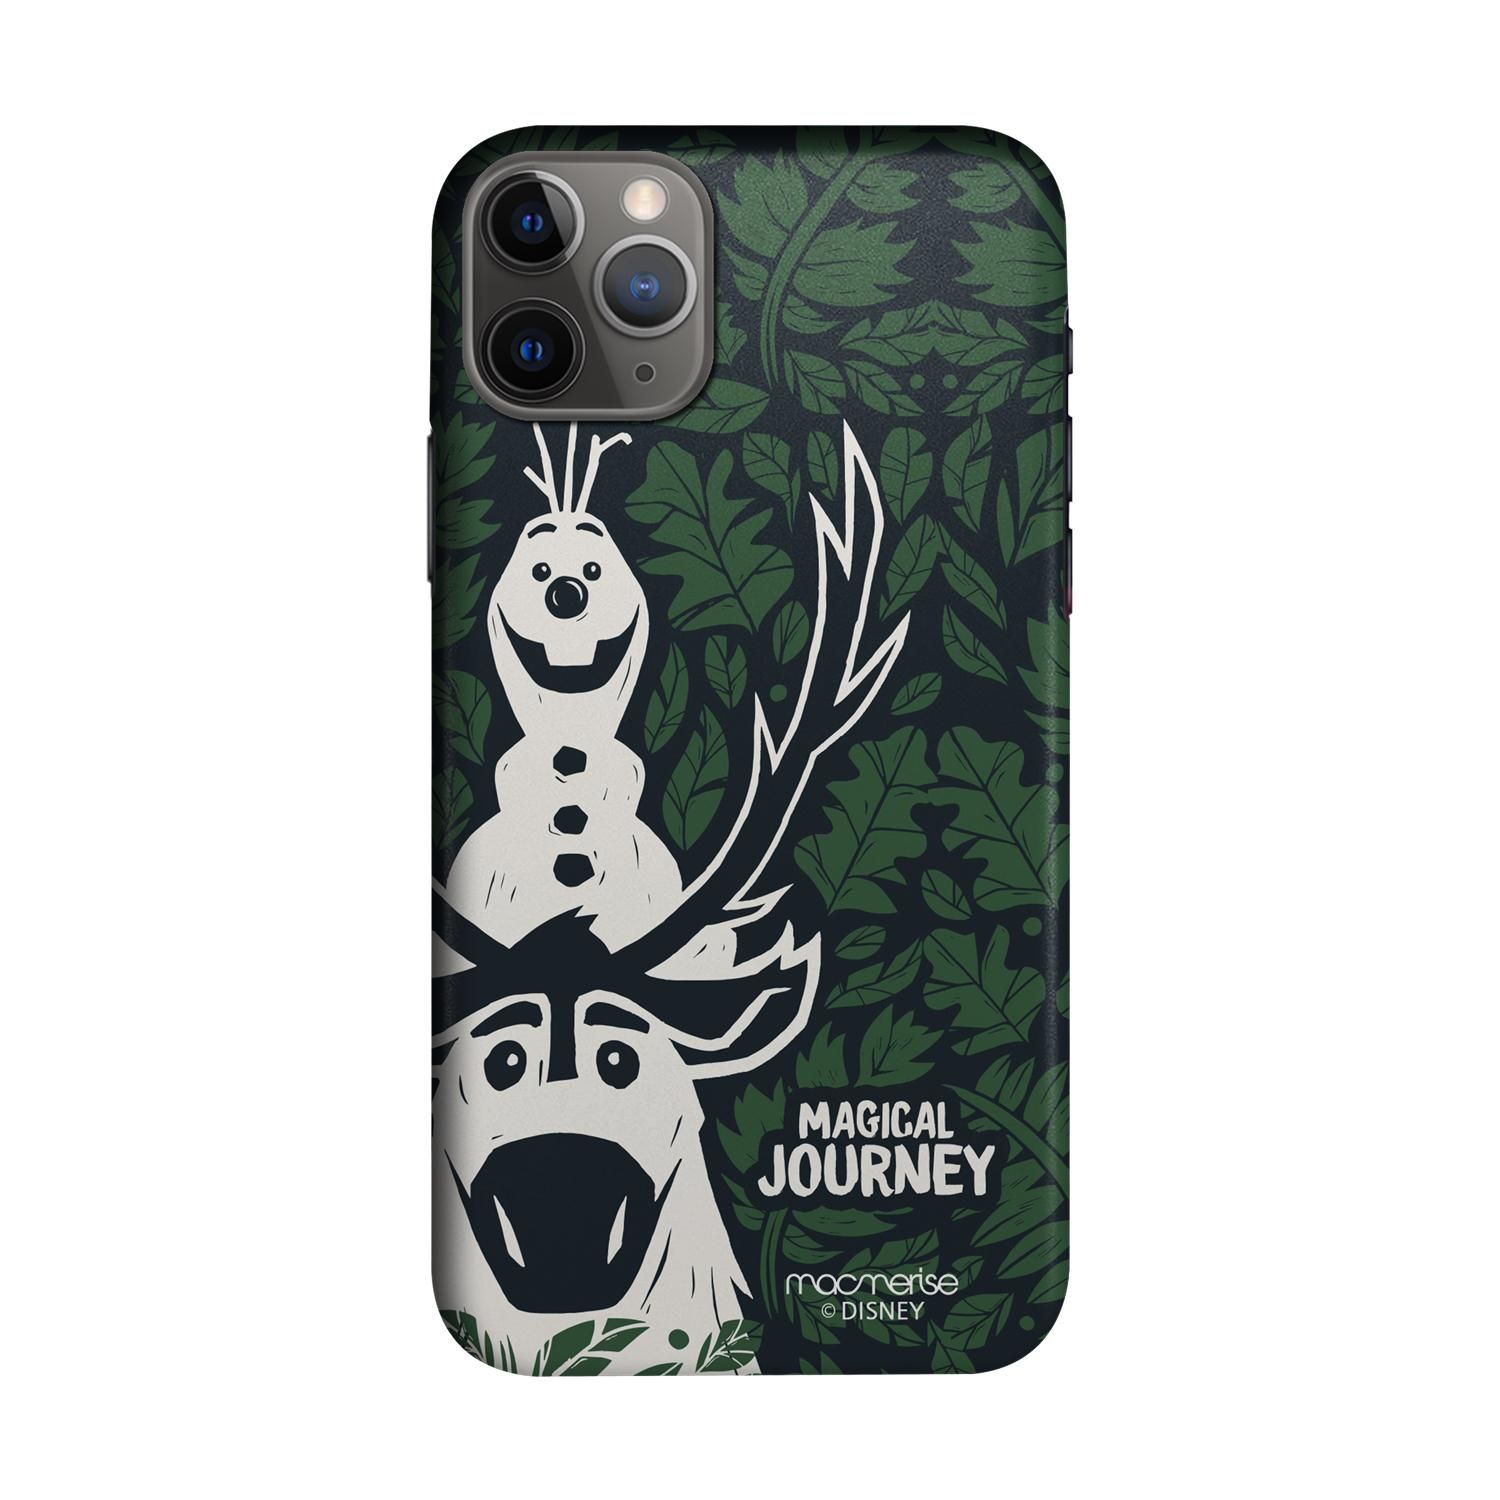 Buy Magical Journey - Sleek Phone Case for iPhone 11 Pro Max Online